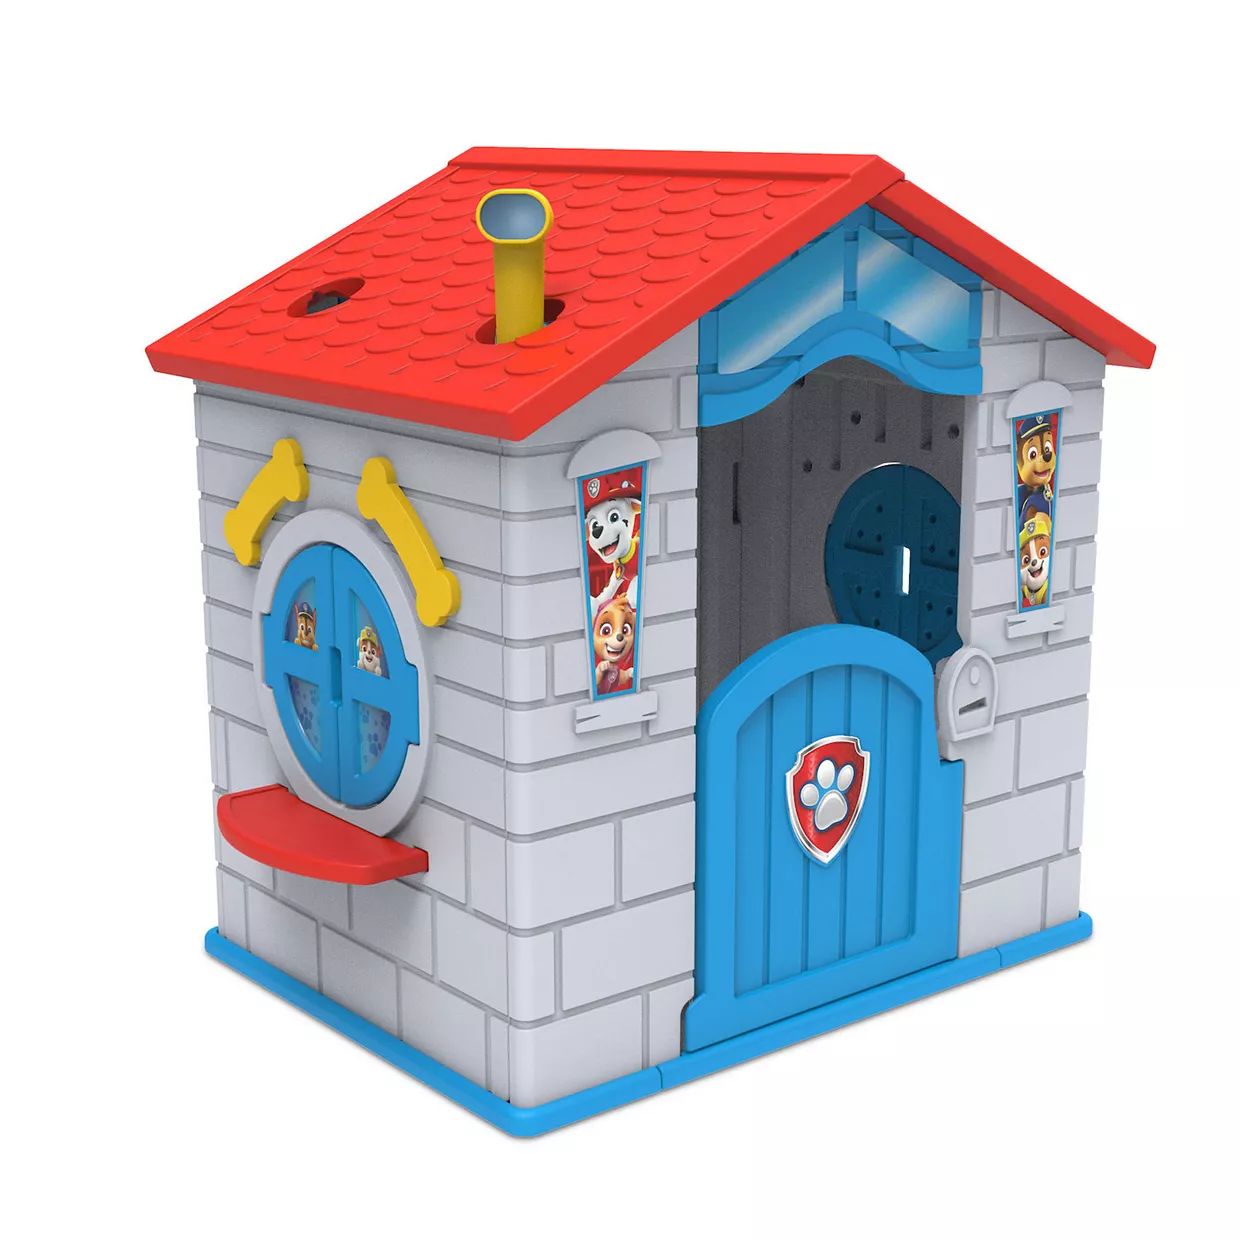 Delta Children PAW Patrol Outdoor Play House | Kohl's